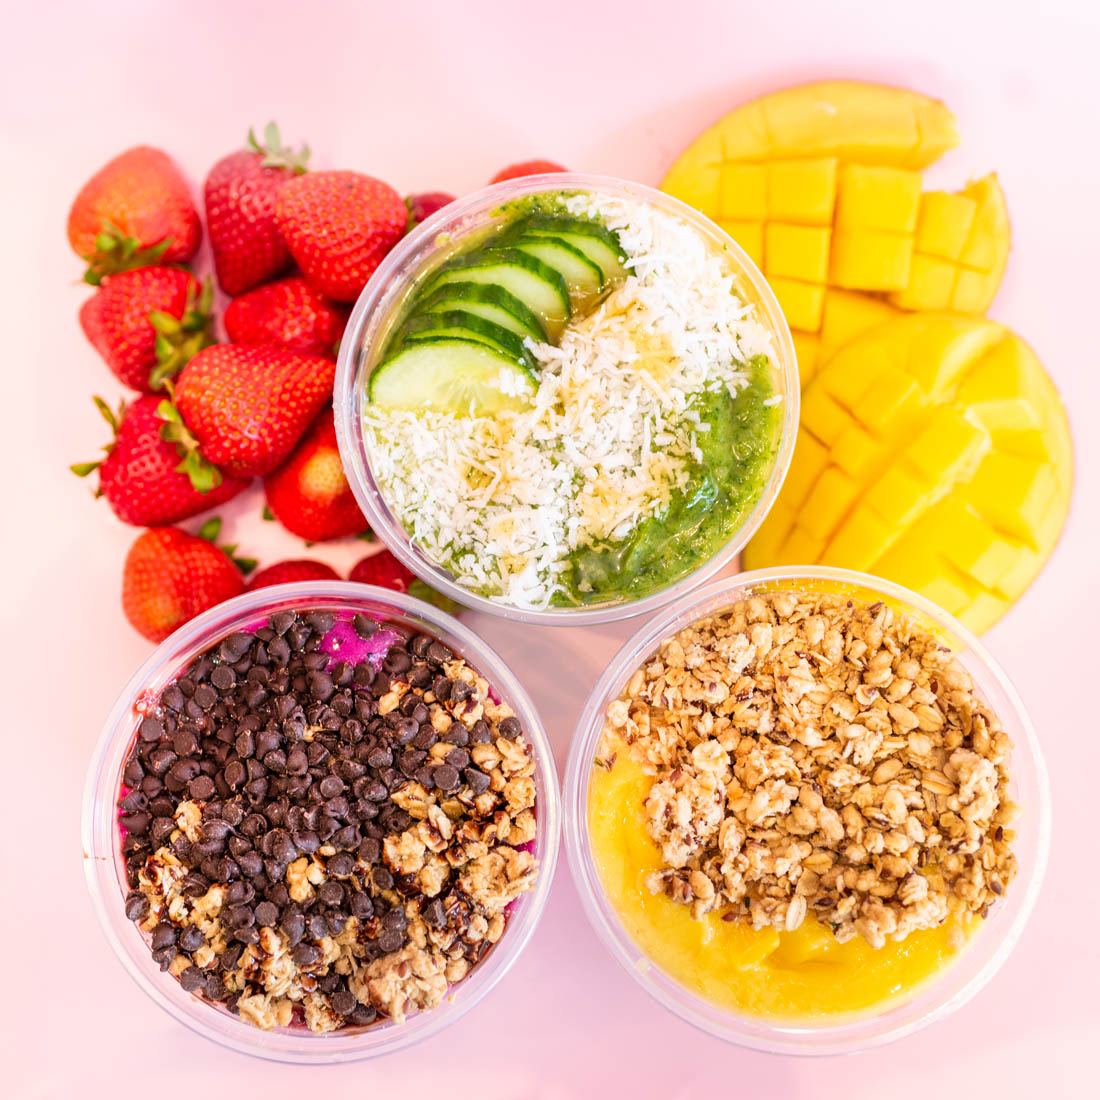 Rush Bowls smoothie bowls nutrition info in Broomfield, CO.